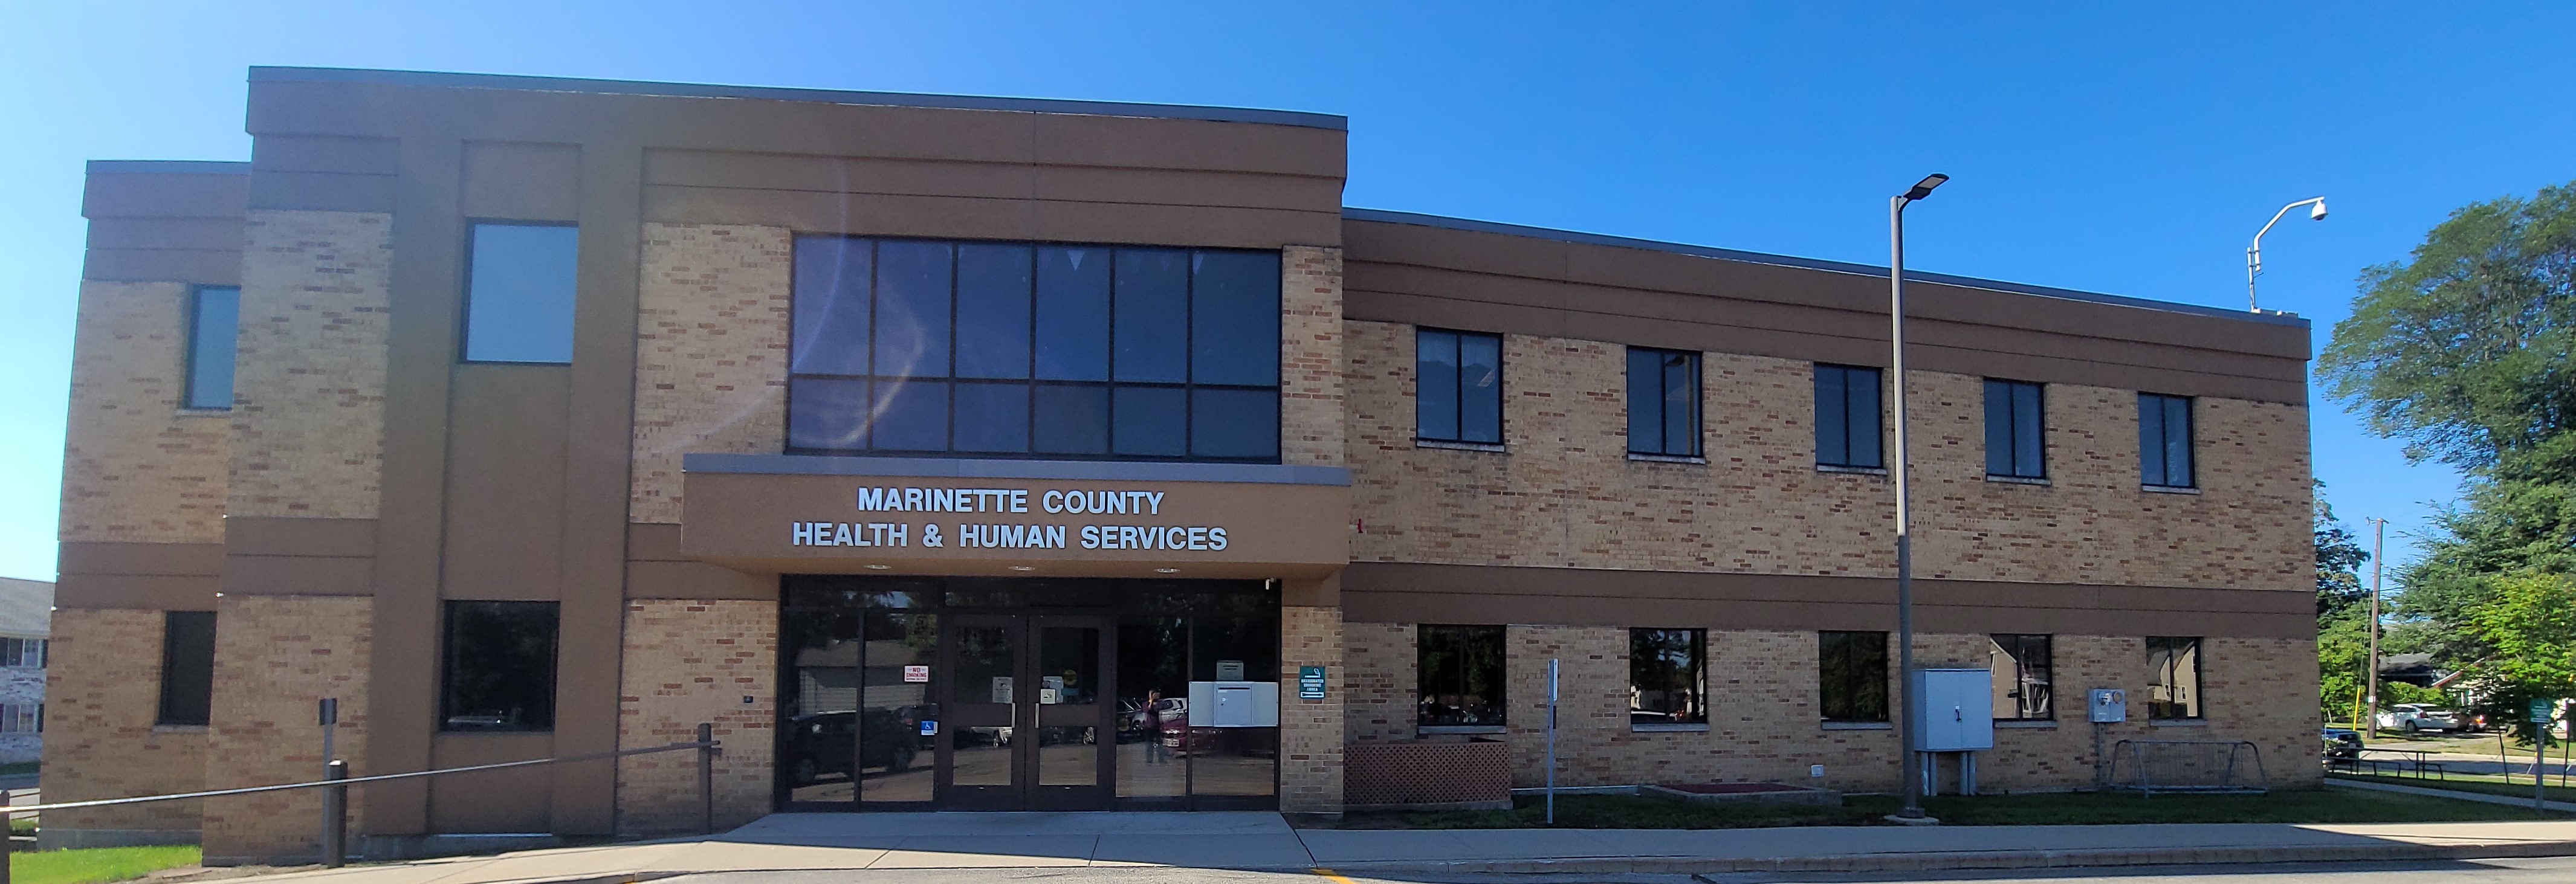 Marinette County Health and Human Services Department